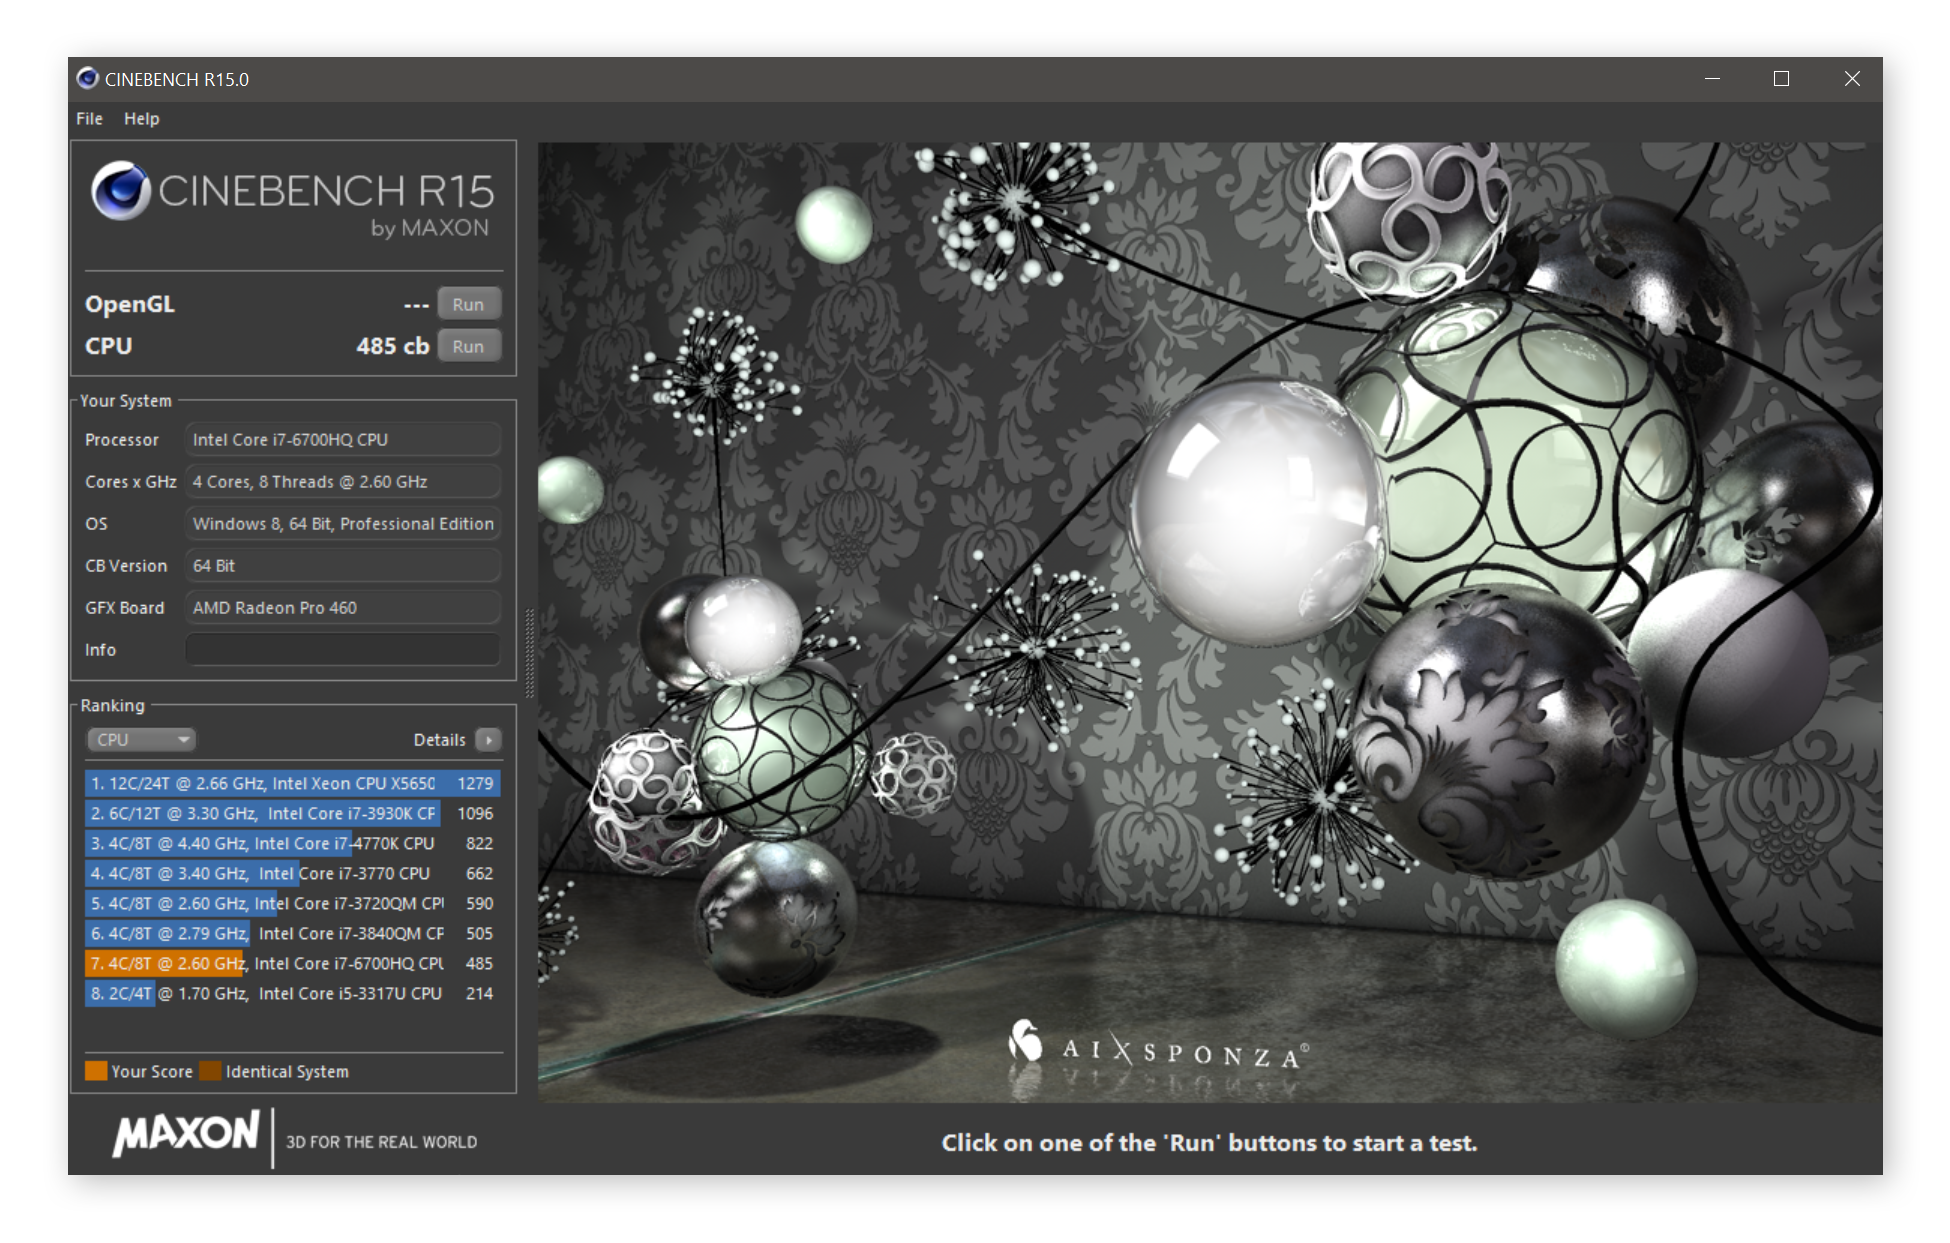 Getting baseline Cinebench results for later comparison